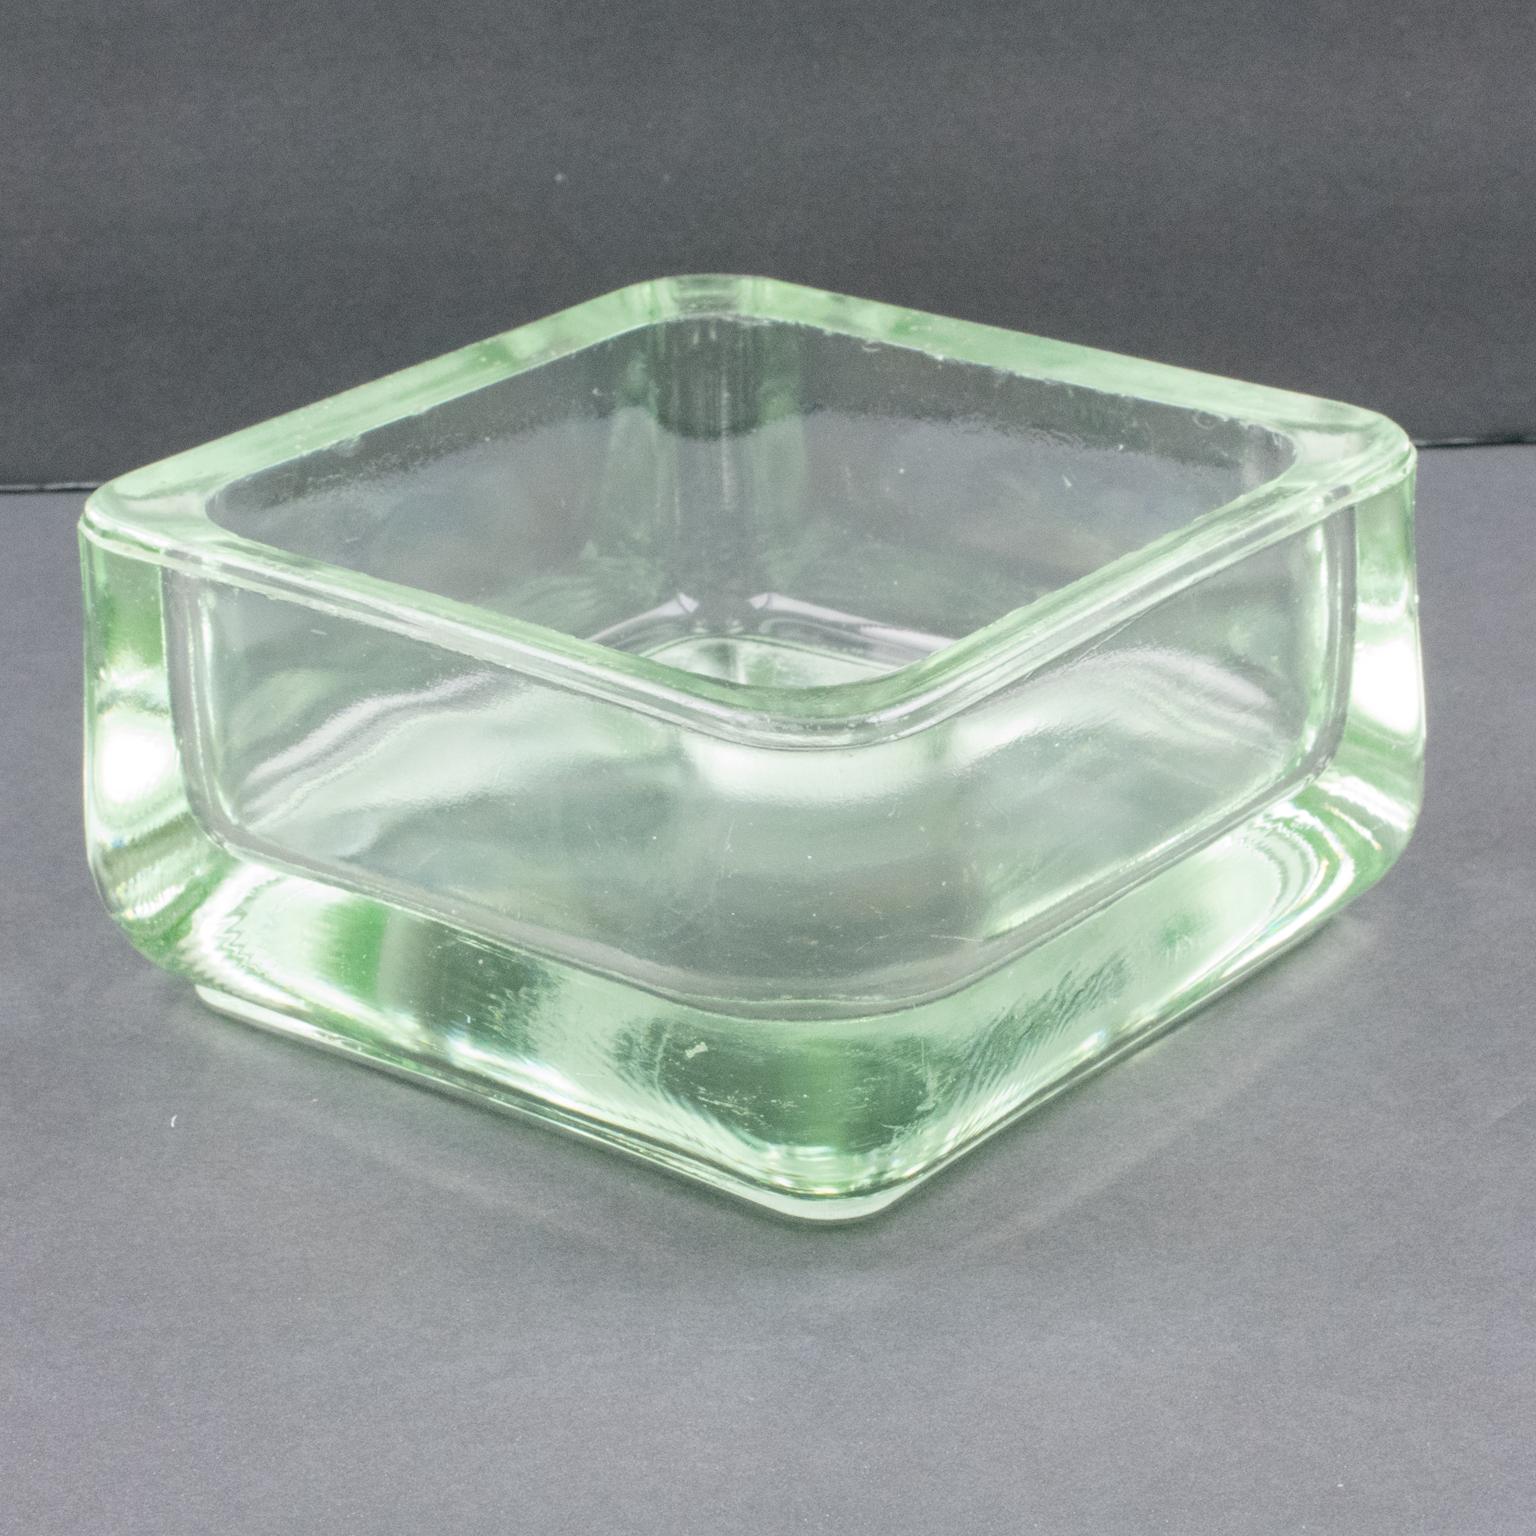 Designed by Le Corbusier for Lumax Molded Glass Desk Accessory Ashtray Catchall 6